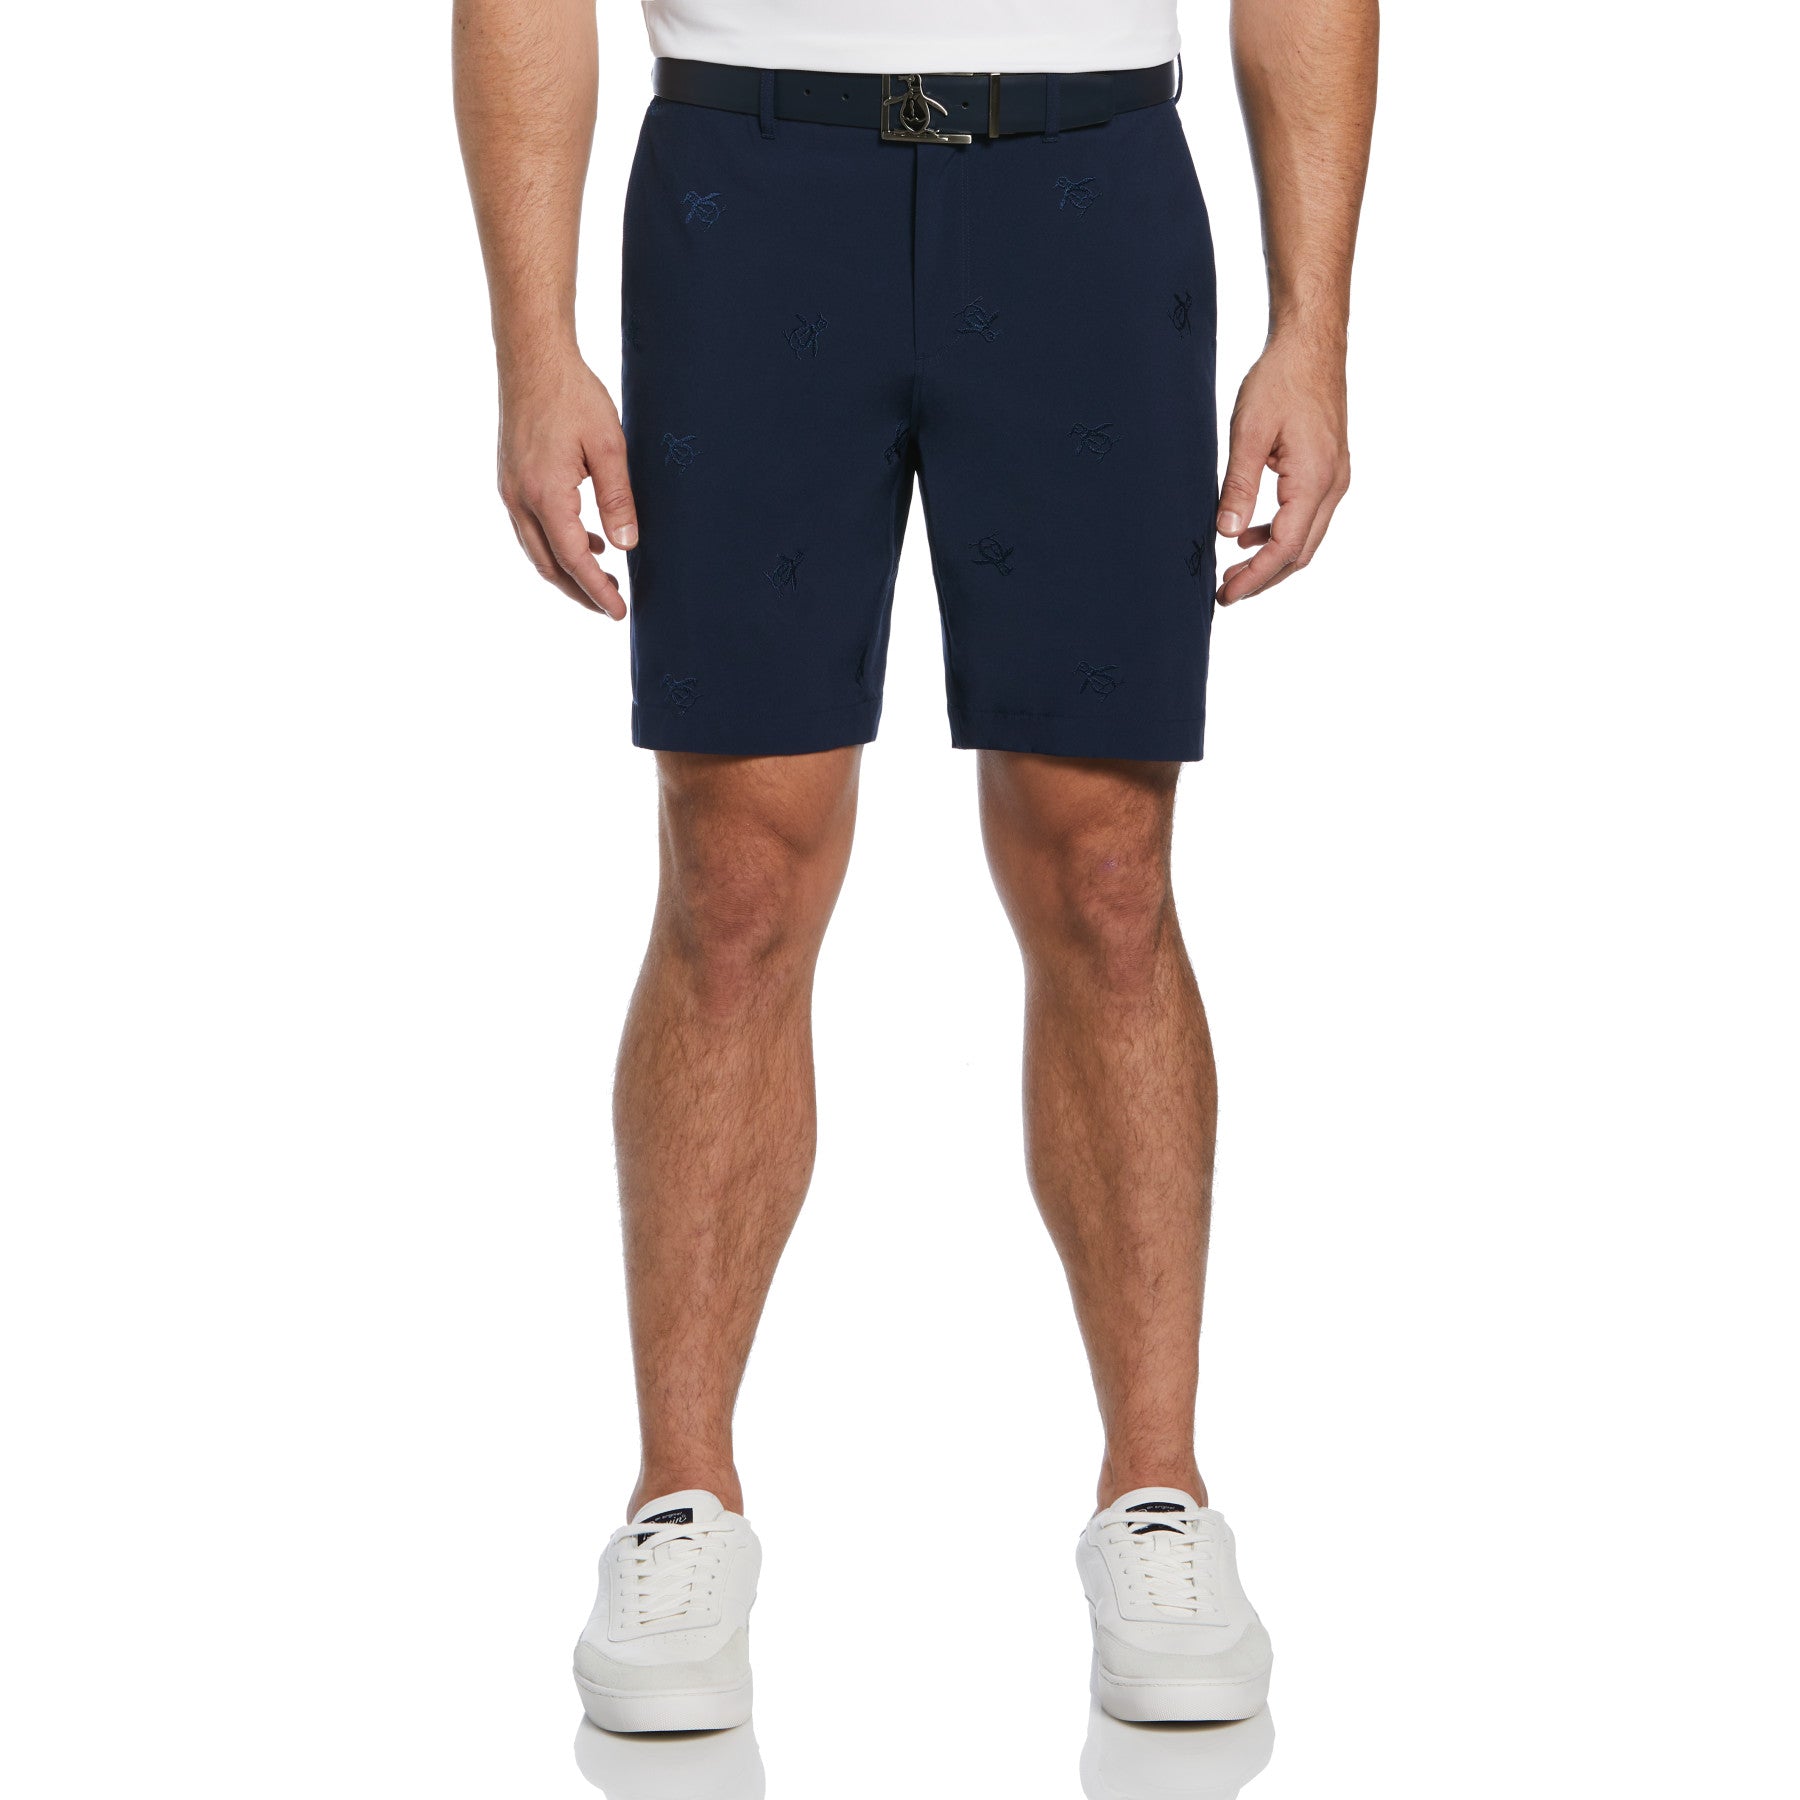 View Pete Embroidered Flat Front Golf Shorts In Black Iris information